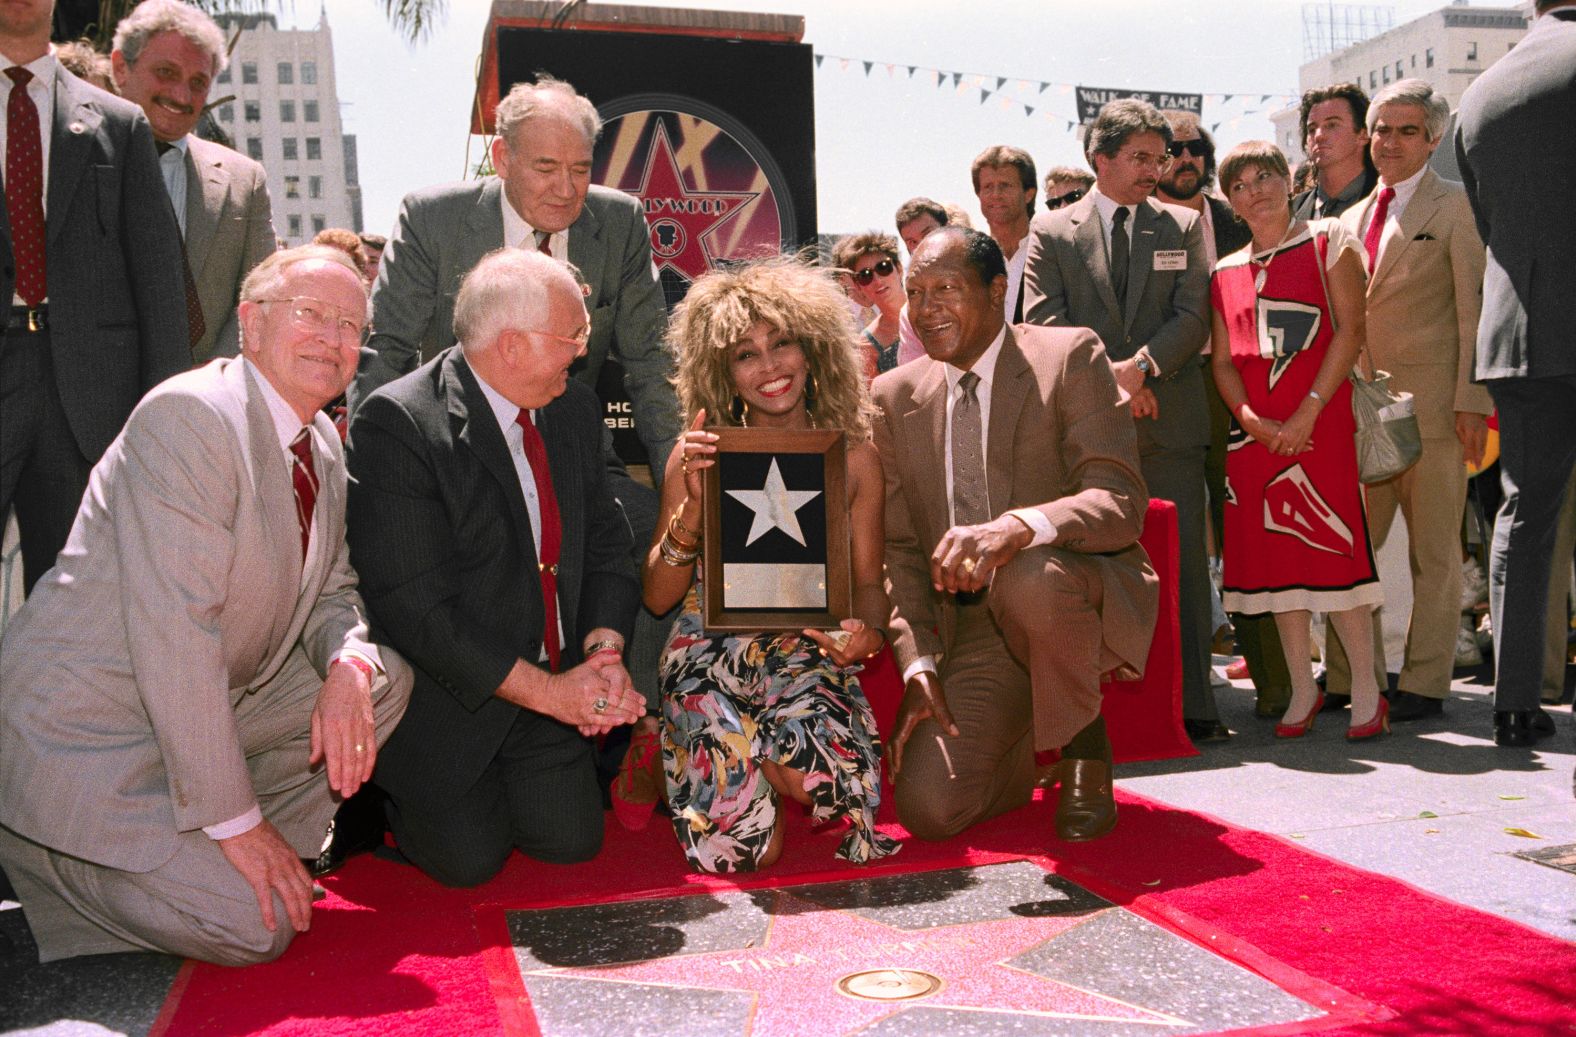 Turner receives a star on the Hollywood Walk of Fame in 1986.